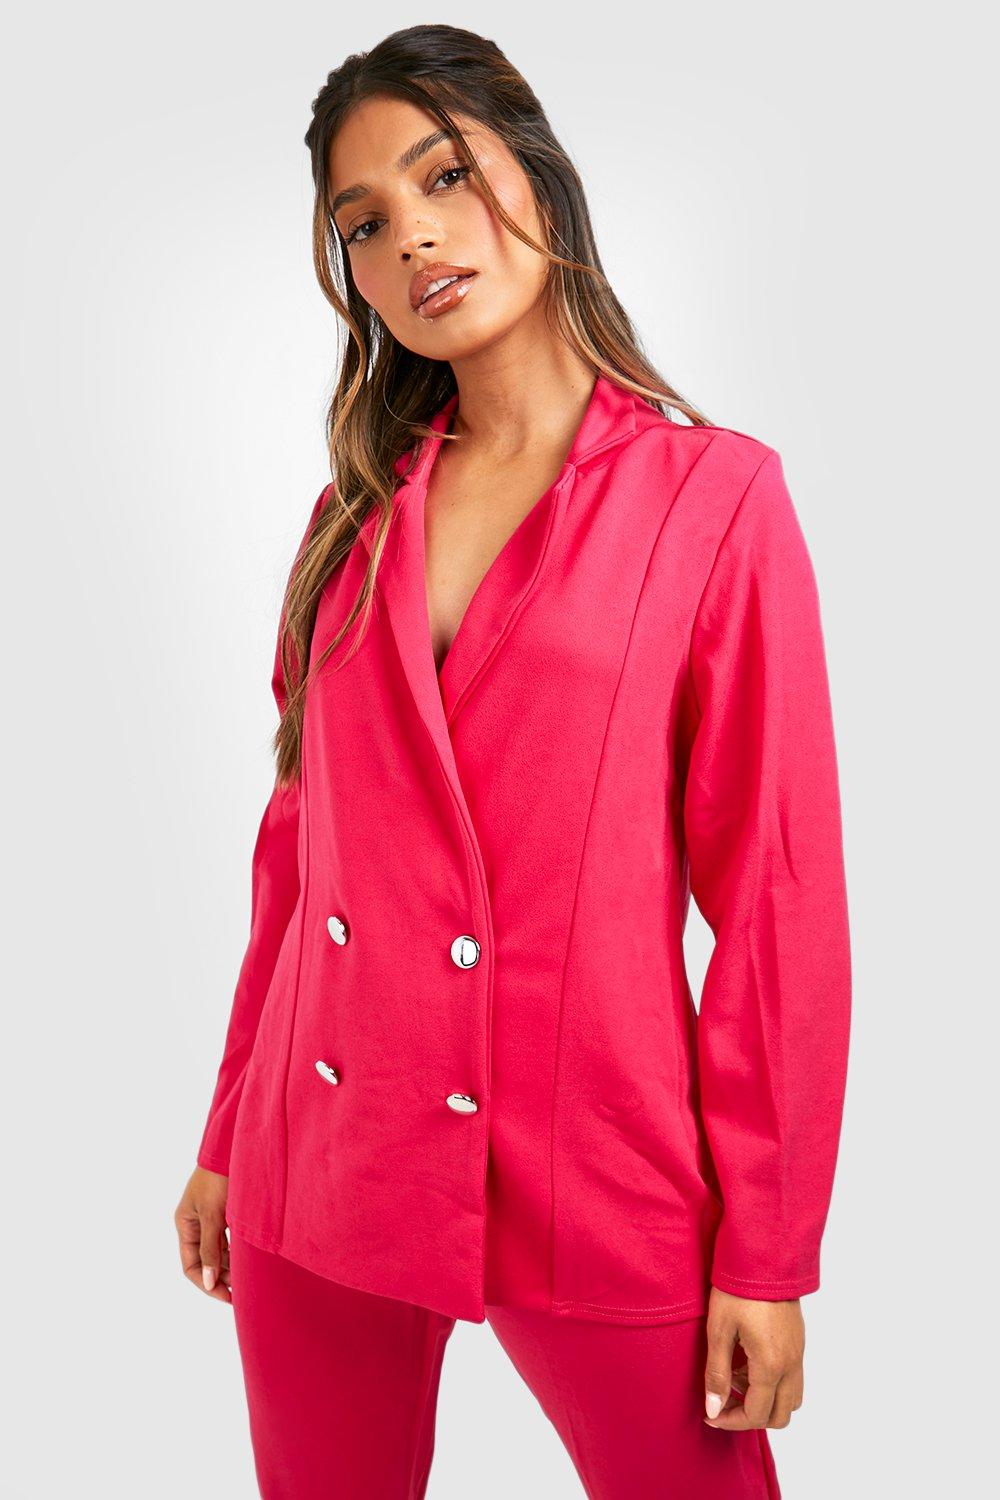 Suit up With This $41 Blazer & Pants Set That Comes in 9 Colors